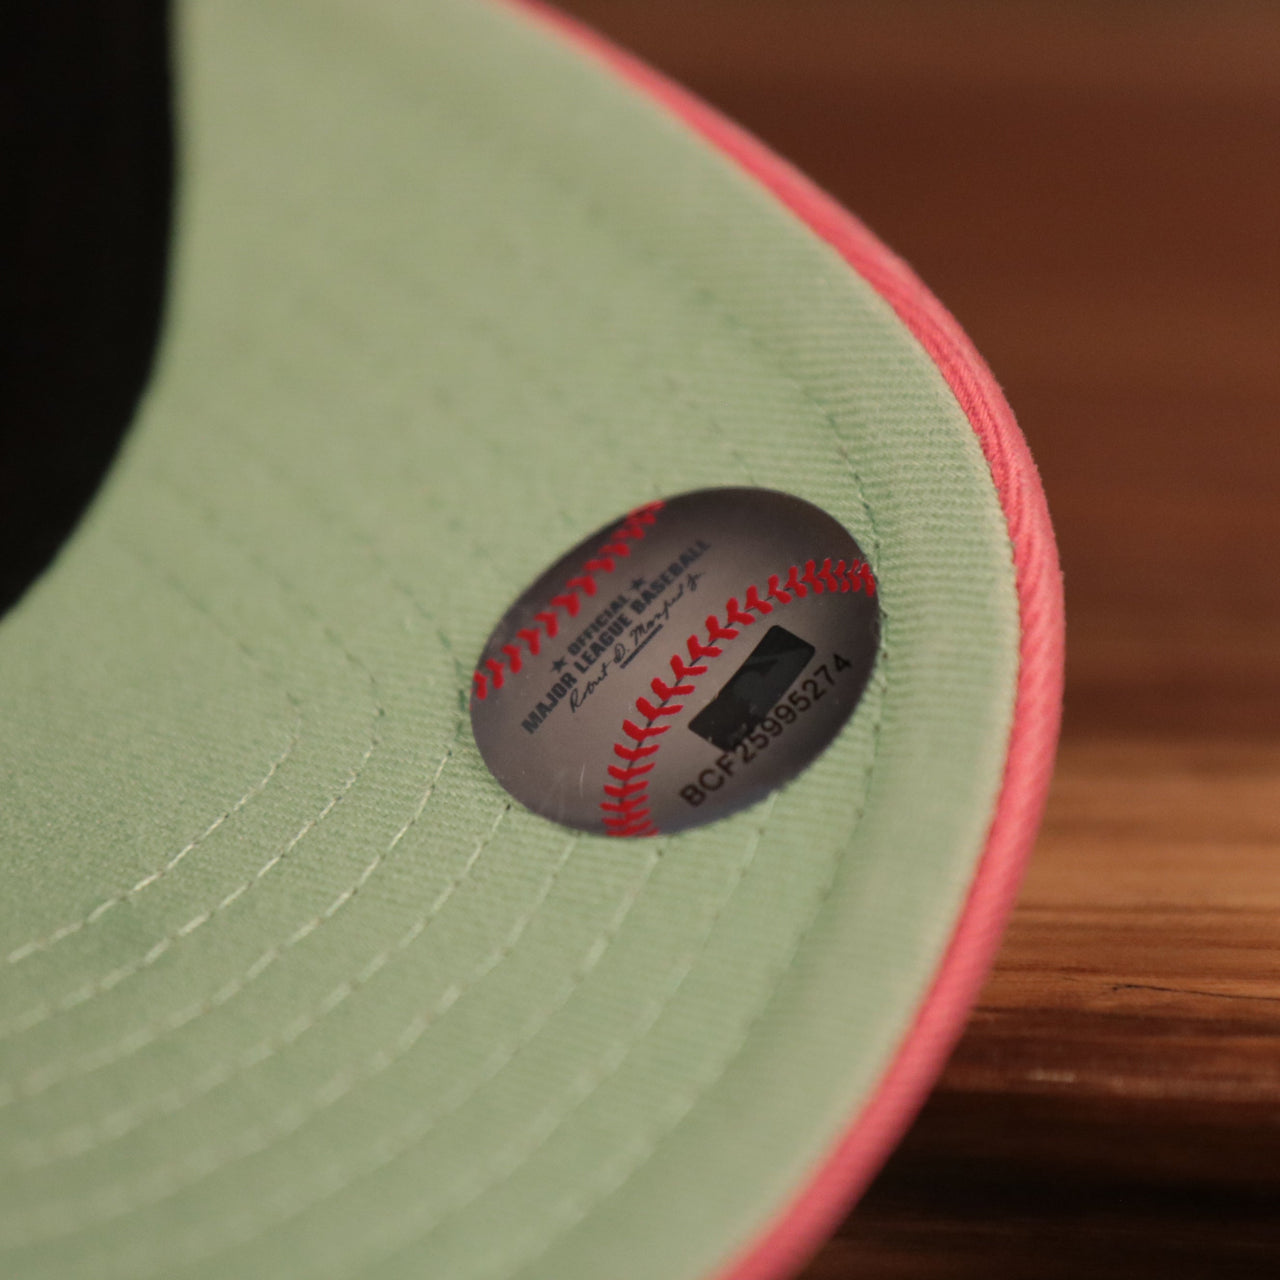 The Official Major League Baseball tag on the Dodgers green bottom dad hat.